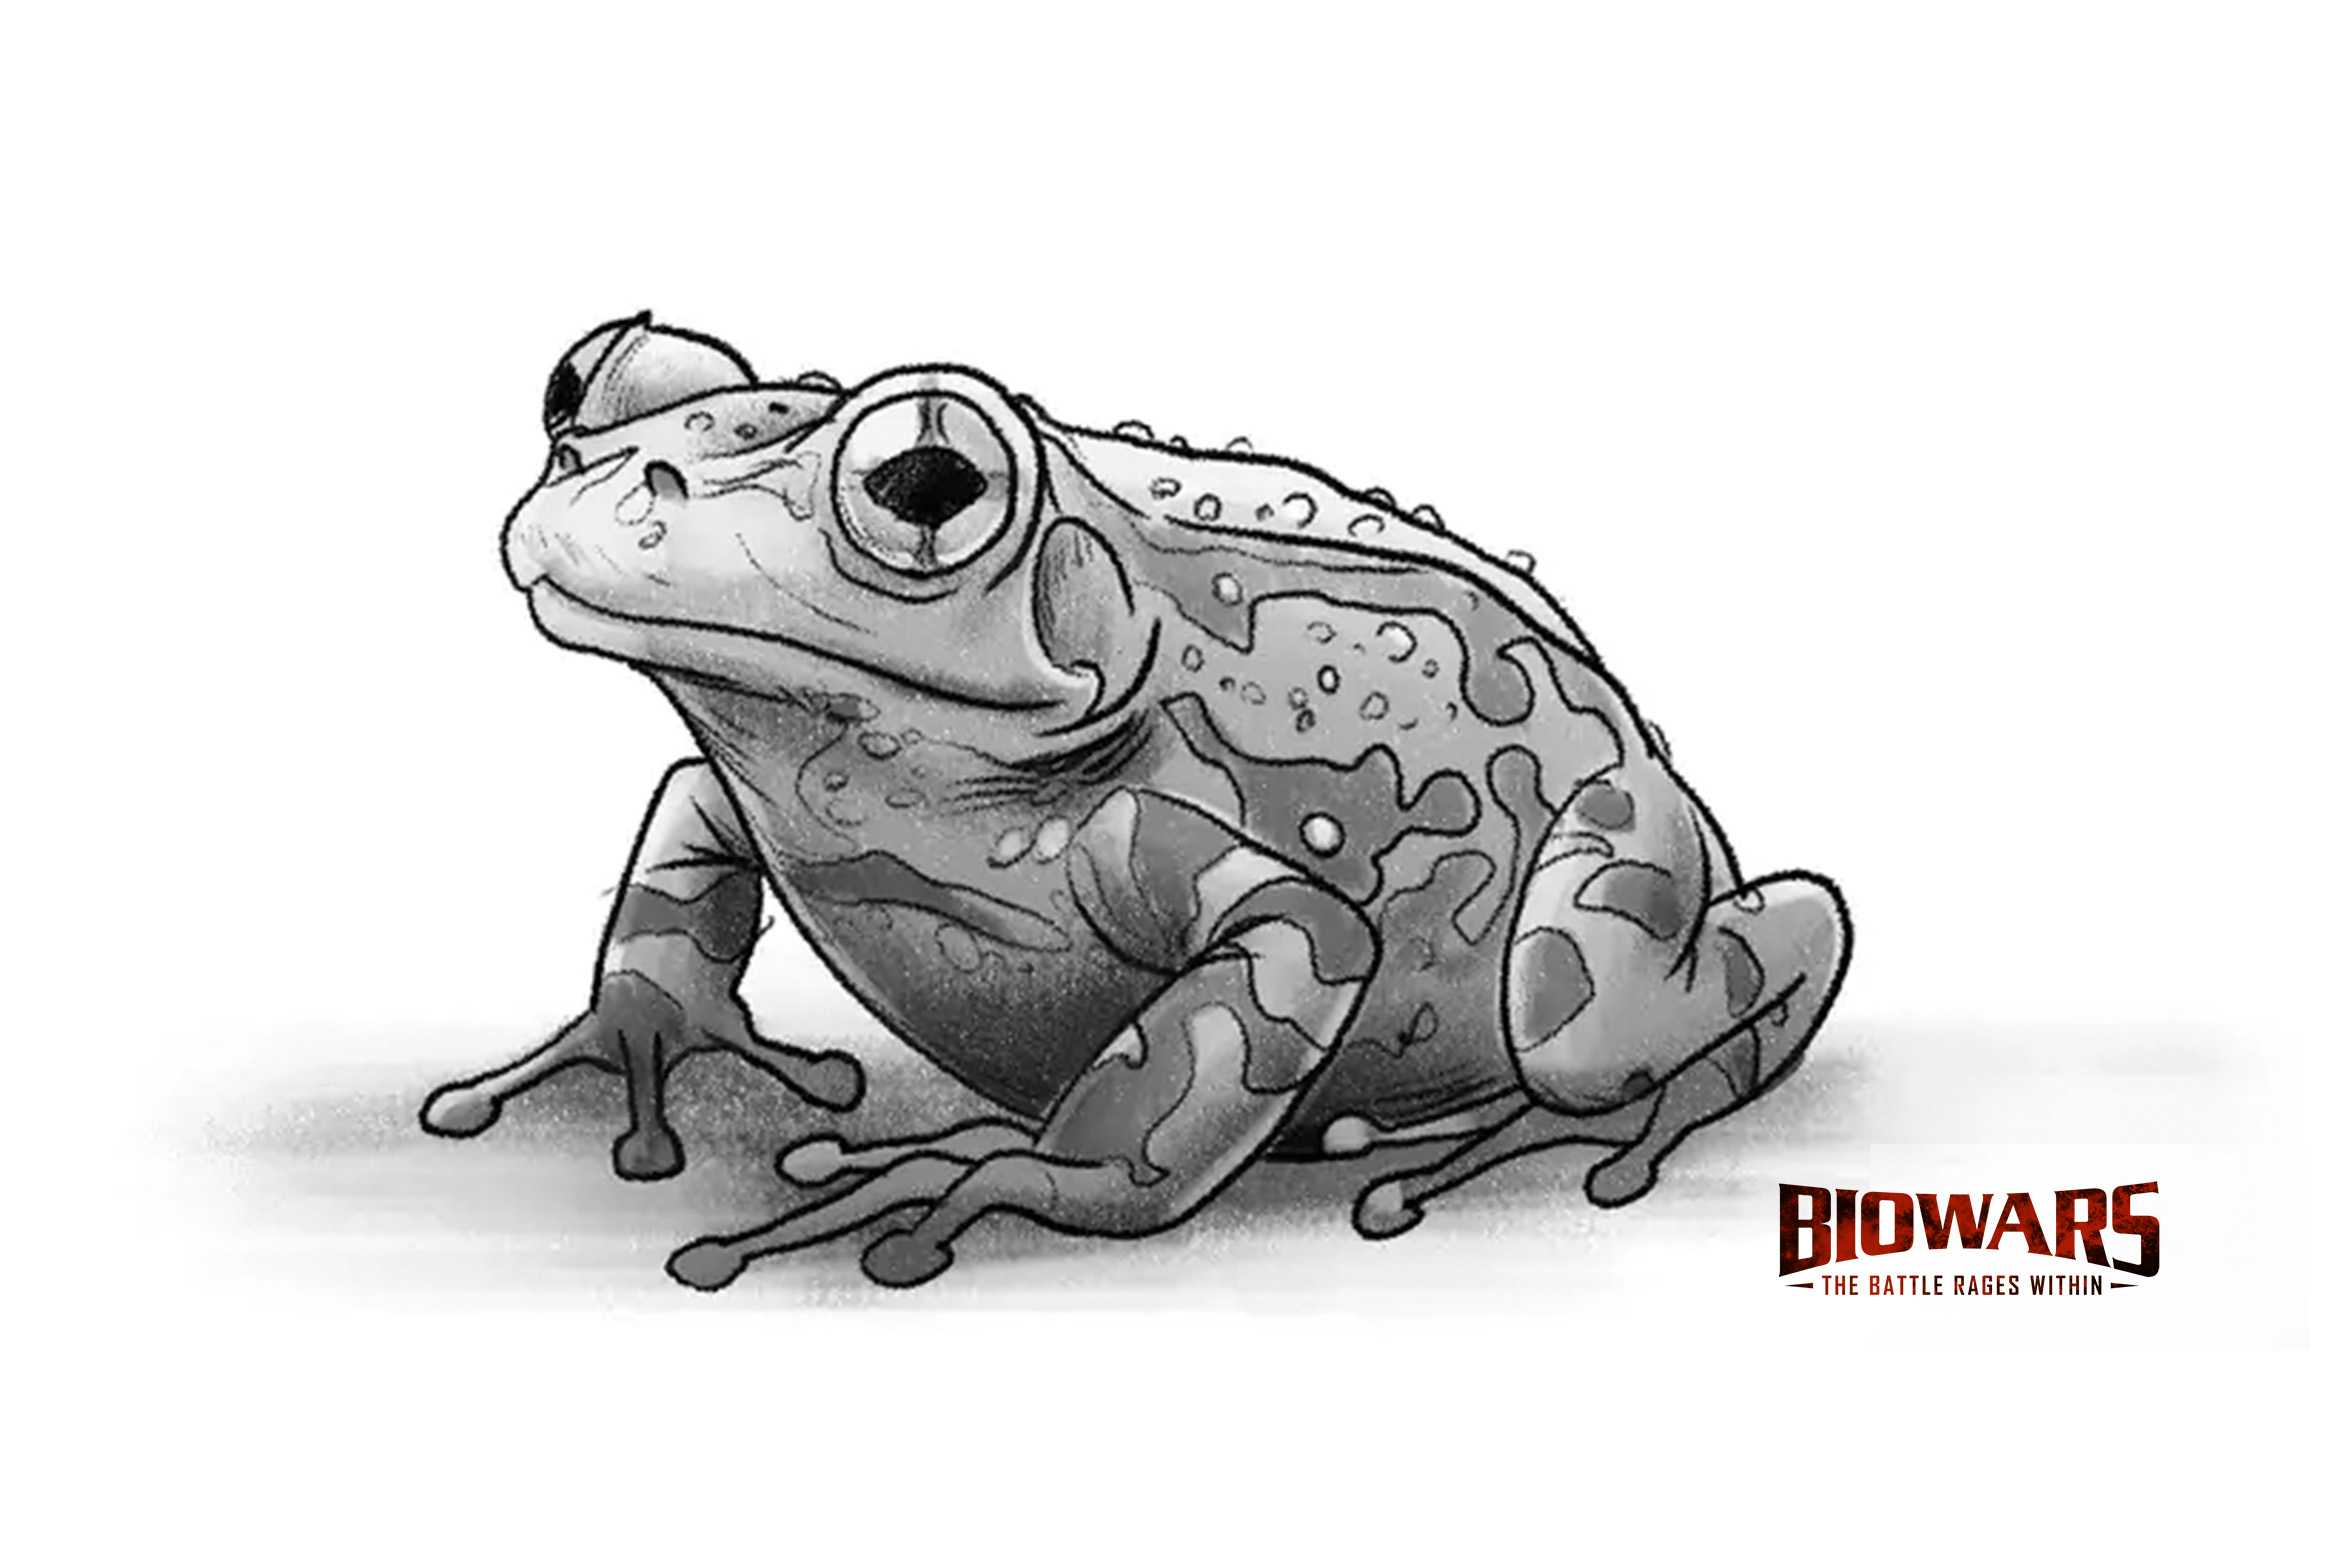 How To Draw A Simple Frog, Step by Step, Drawing Guide, by Dawn - DragoArt